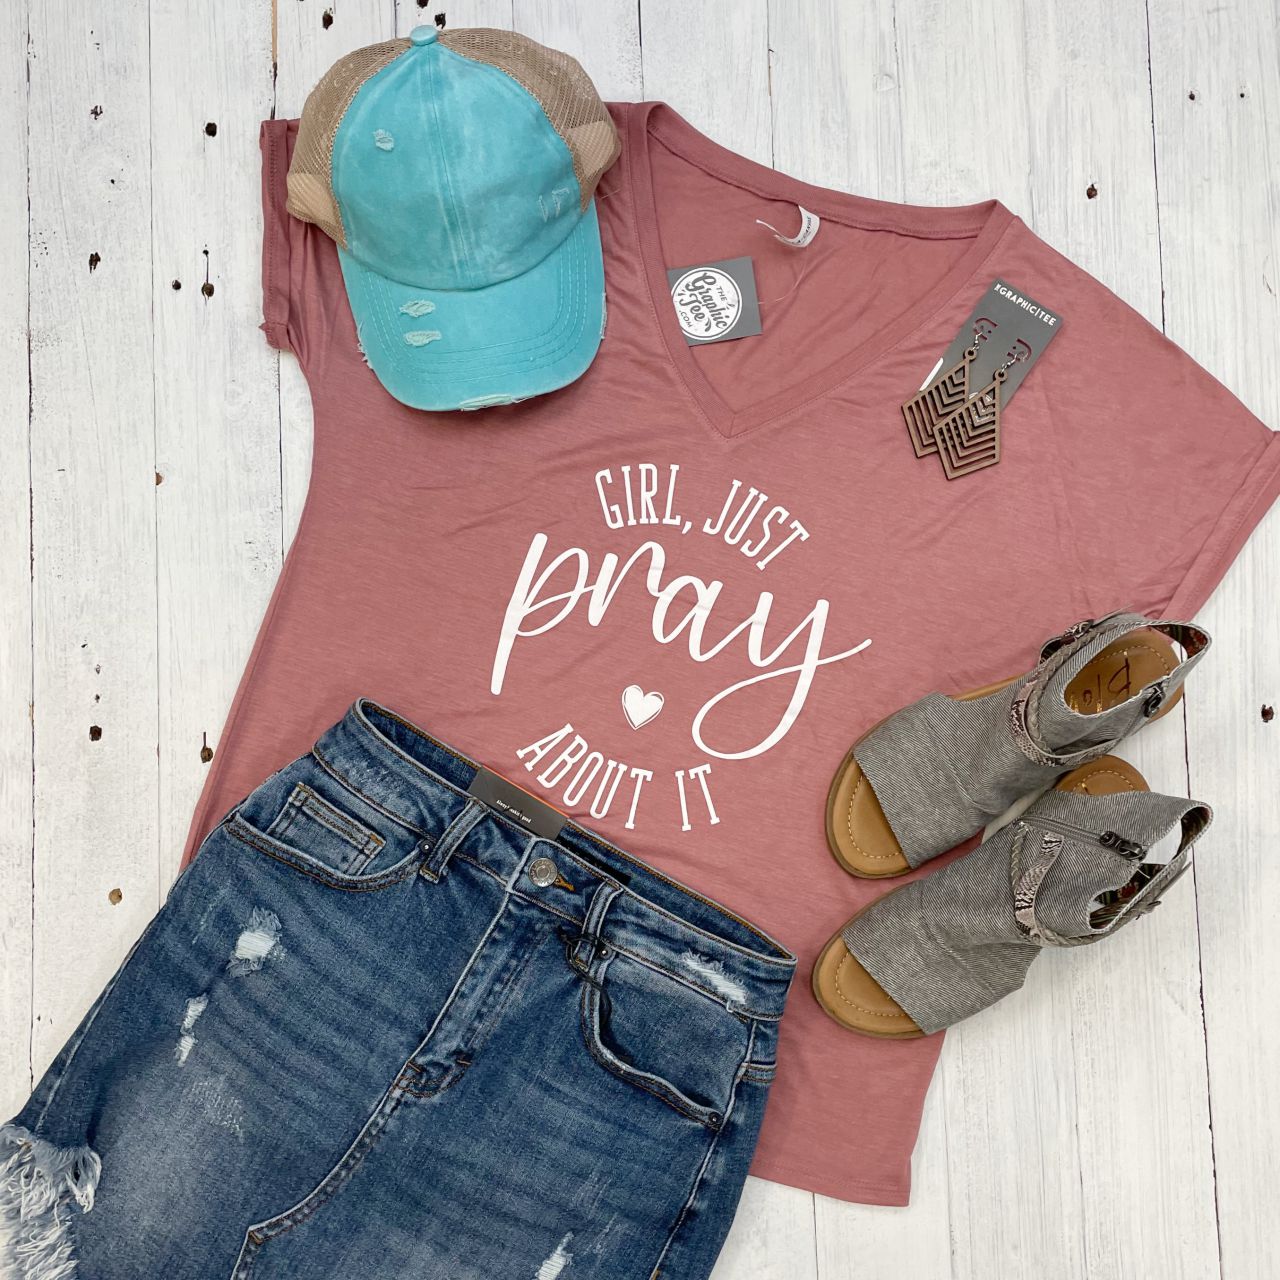 Girl, Just Pray About It Women's Slouchy V Neck Tee - The Graphic Tee